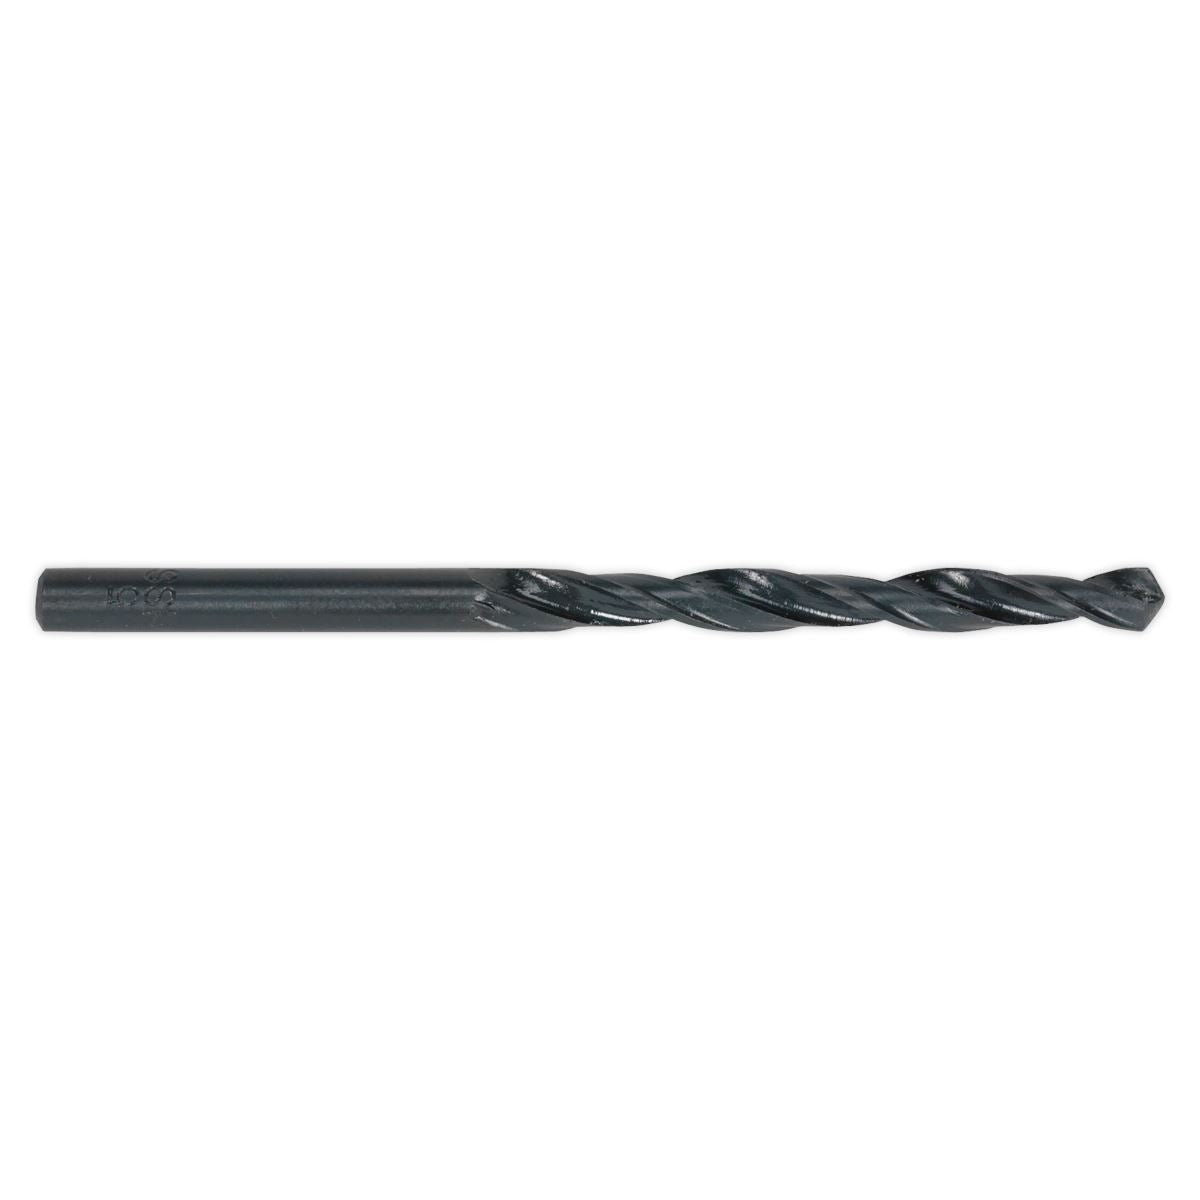 Sealey HSS Roll Forged Drill Bit Ø12.5mm Pack of 5